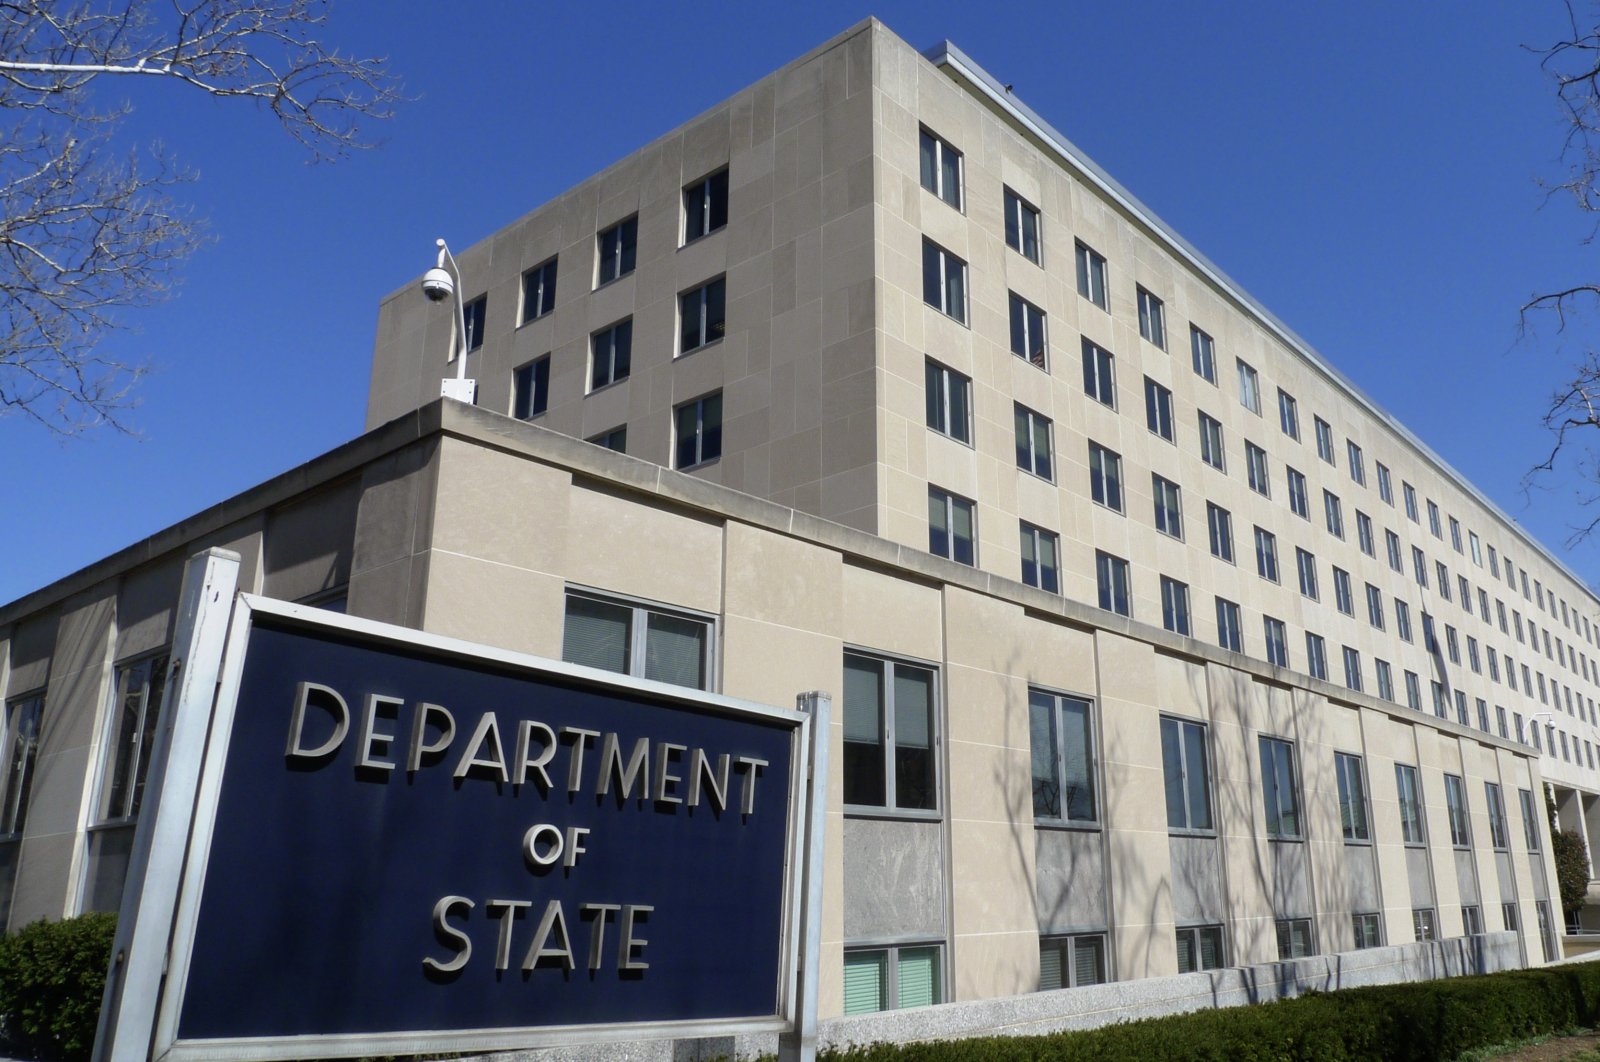 The Harry S. Truman Building, headquarters for the State Department, is seen in Washington, in this March 9, 2009 file photo. (AP File Photo)